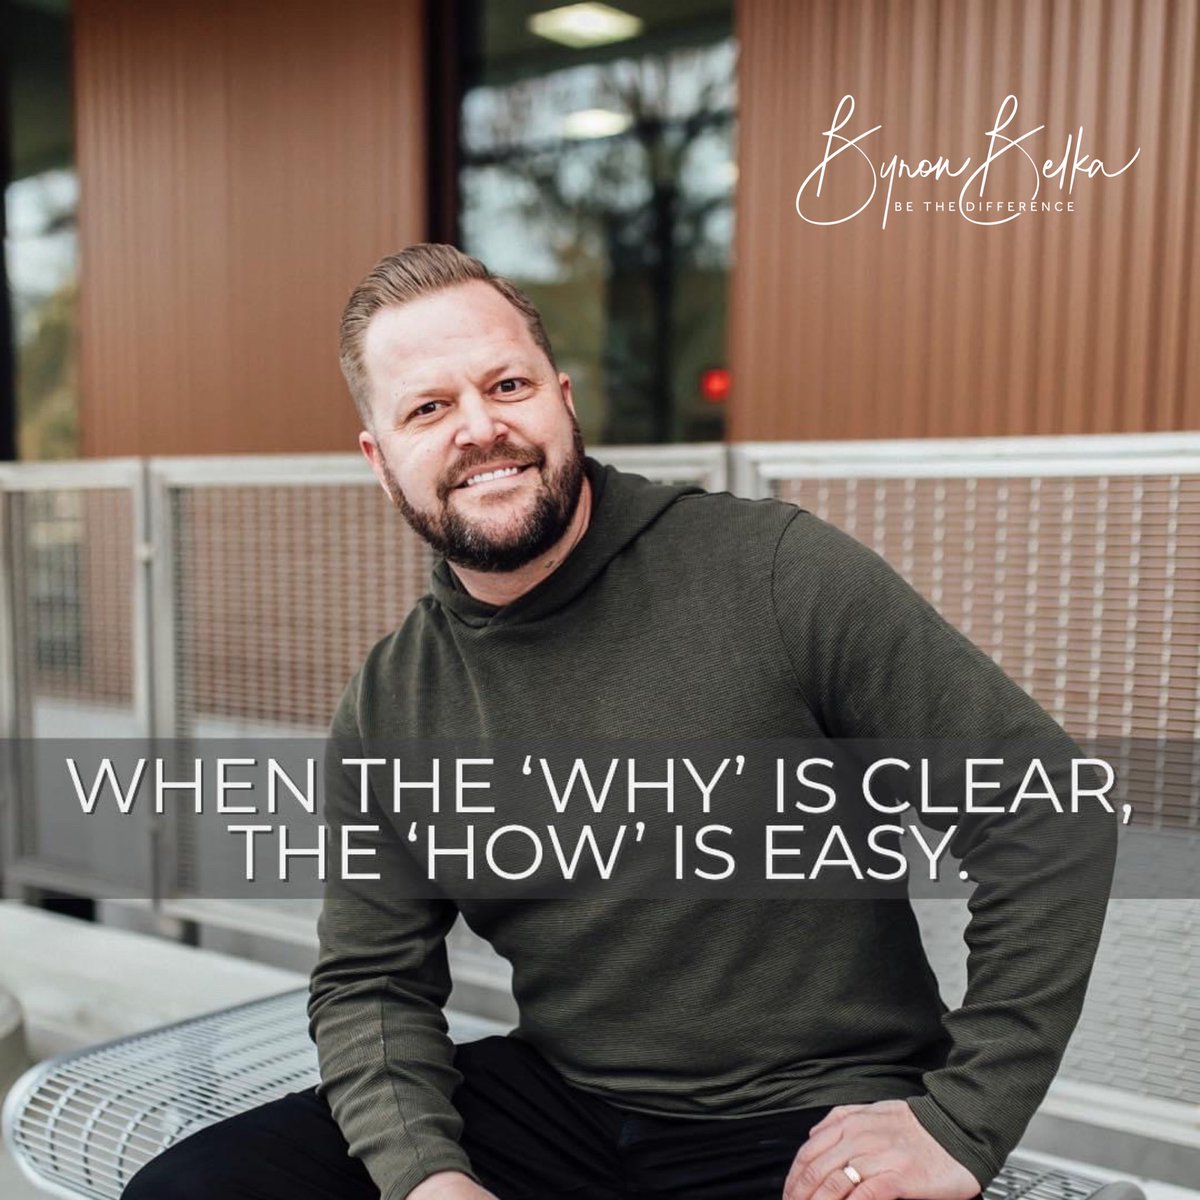 Ever wonder why some folks seem to breeze through challenges? It's all about clarity of purpose. 🧭⚡ When your WHY is laser-focused, your HOW falls into place. Agree? Drop a 💡 if your why's shining bright today! #FindYourWhy #SimplifySuccess